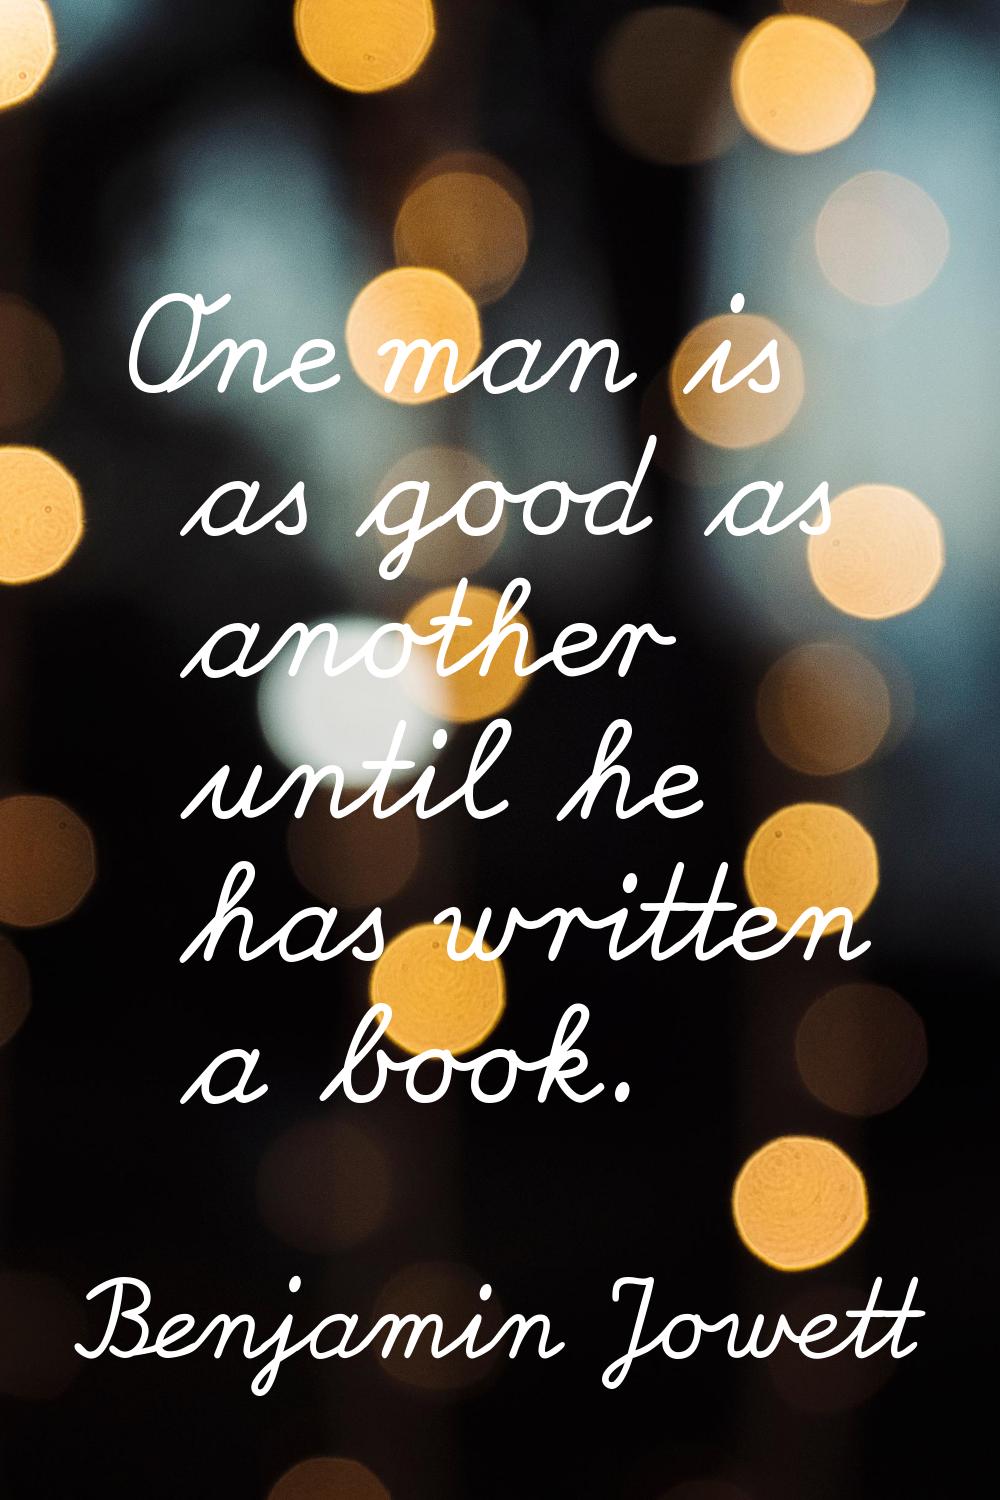 One man is as good as another until he has written a book.